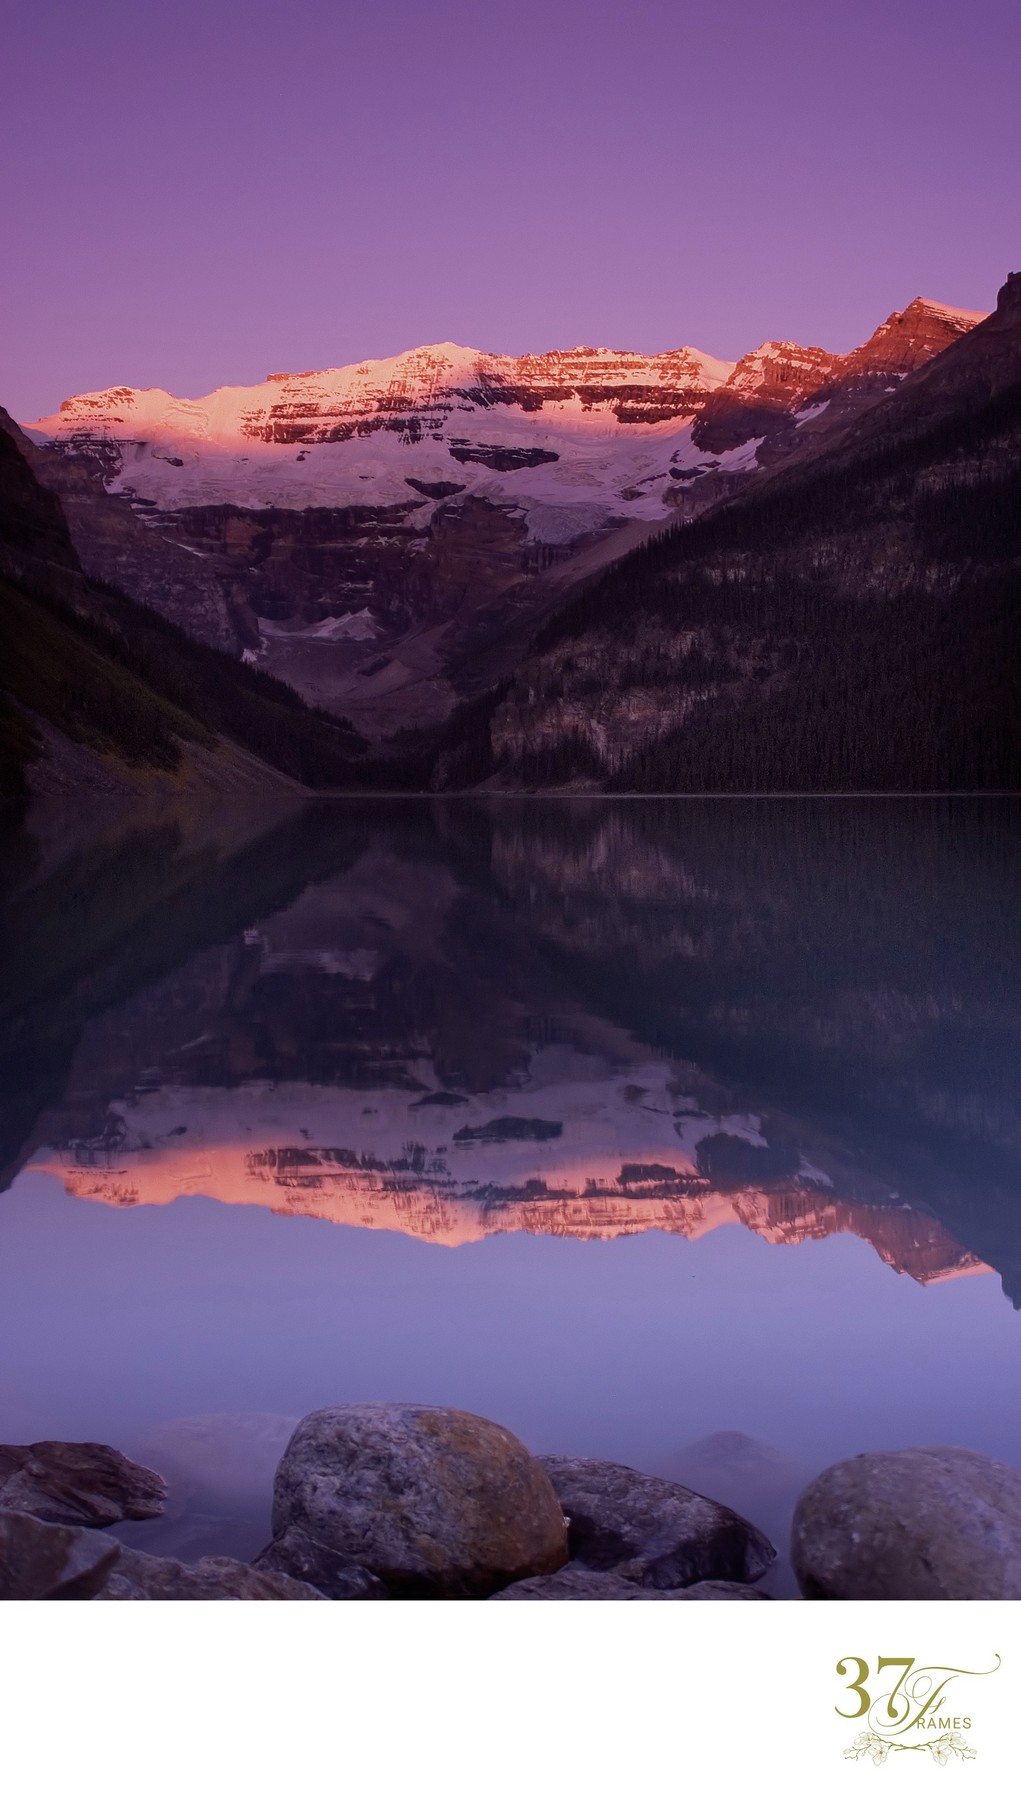 Lake Louise | The Rim of Fire